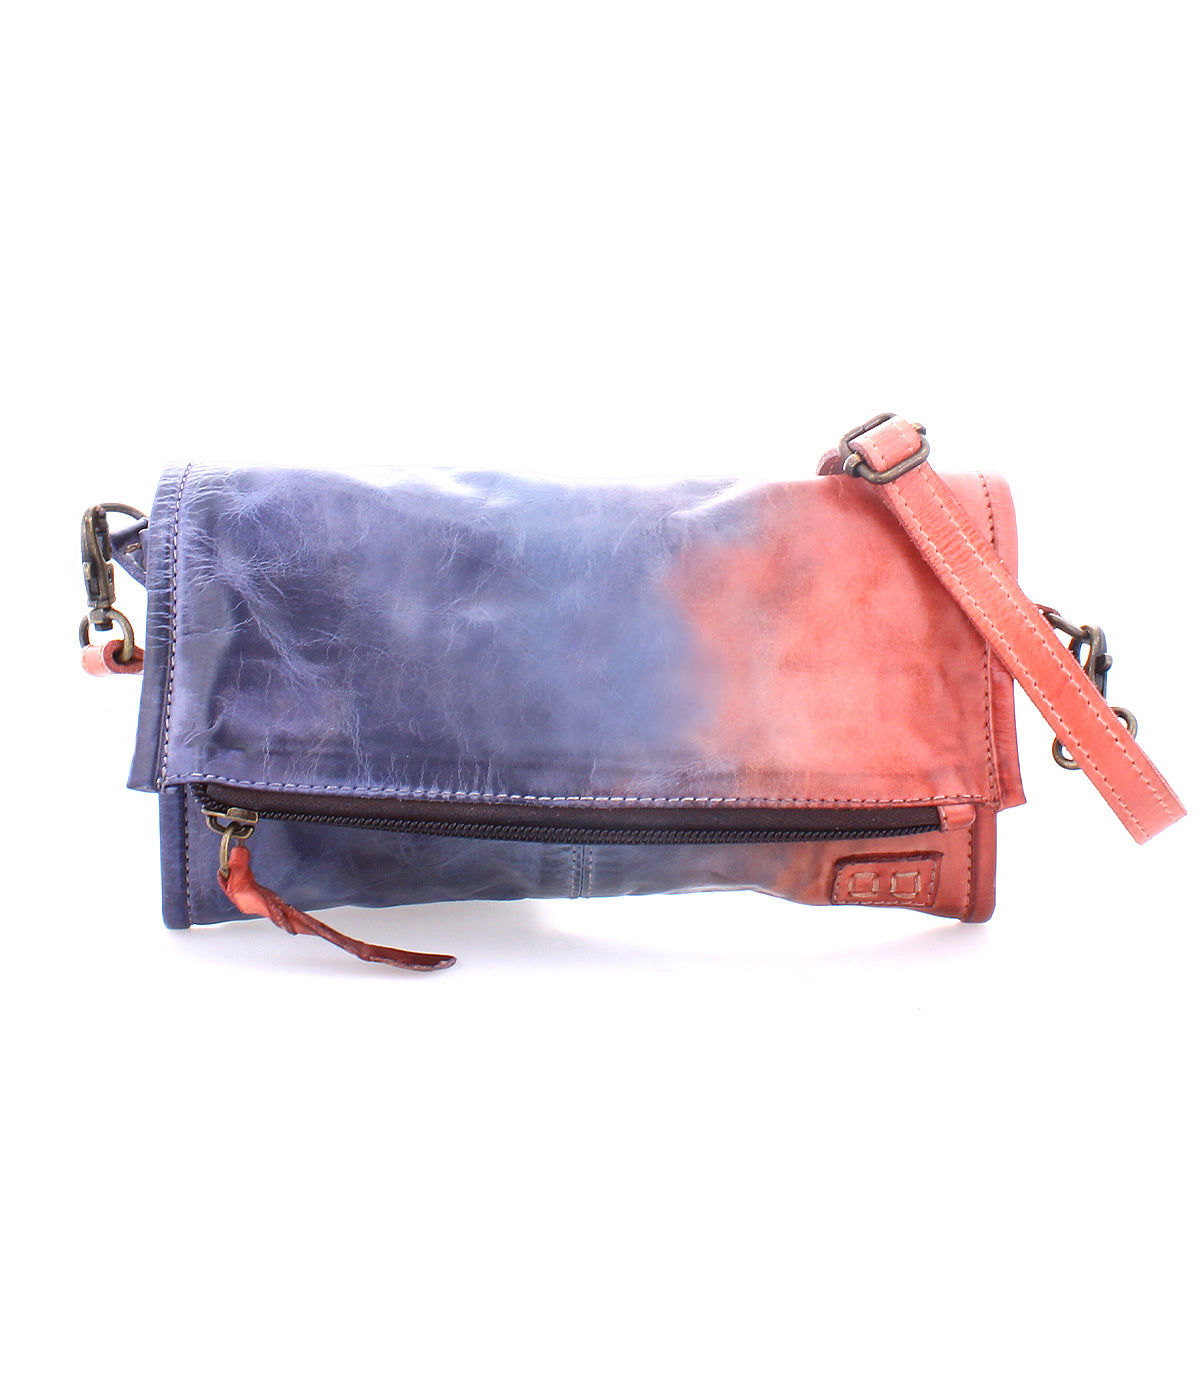 A Amina leather crossbody clutch transitioning from blue to red, with a magnetic flap and adjustable strap, isolated on a white background by Bed Stu.